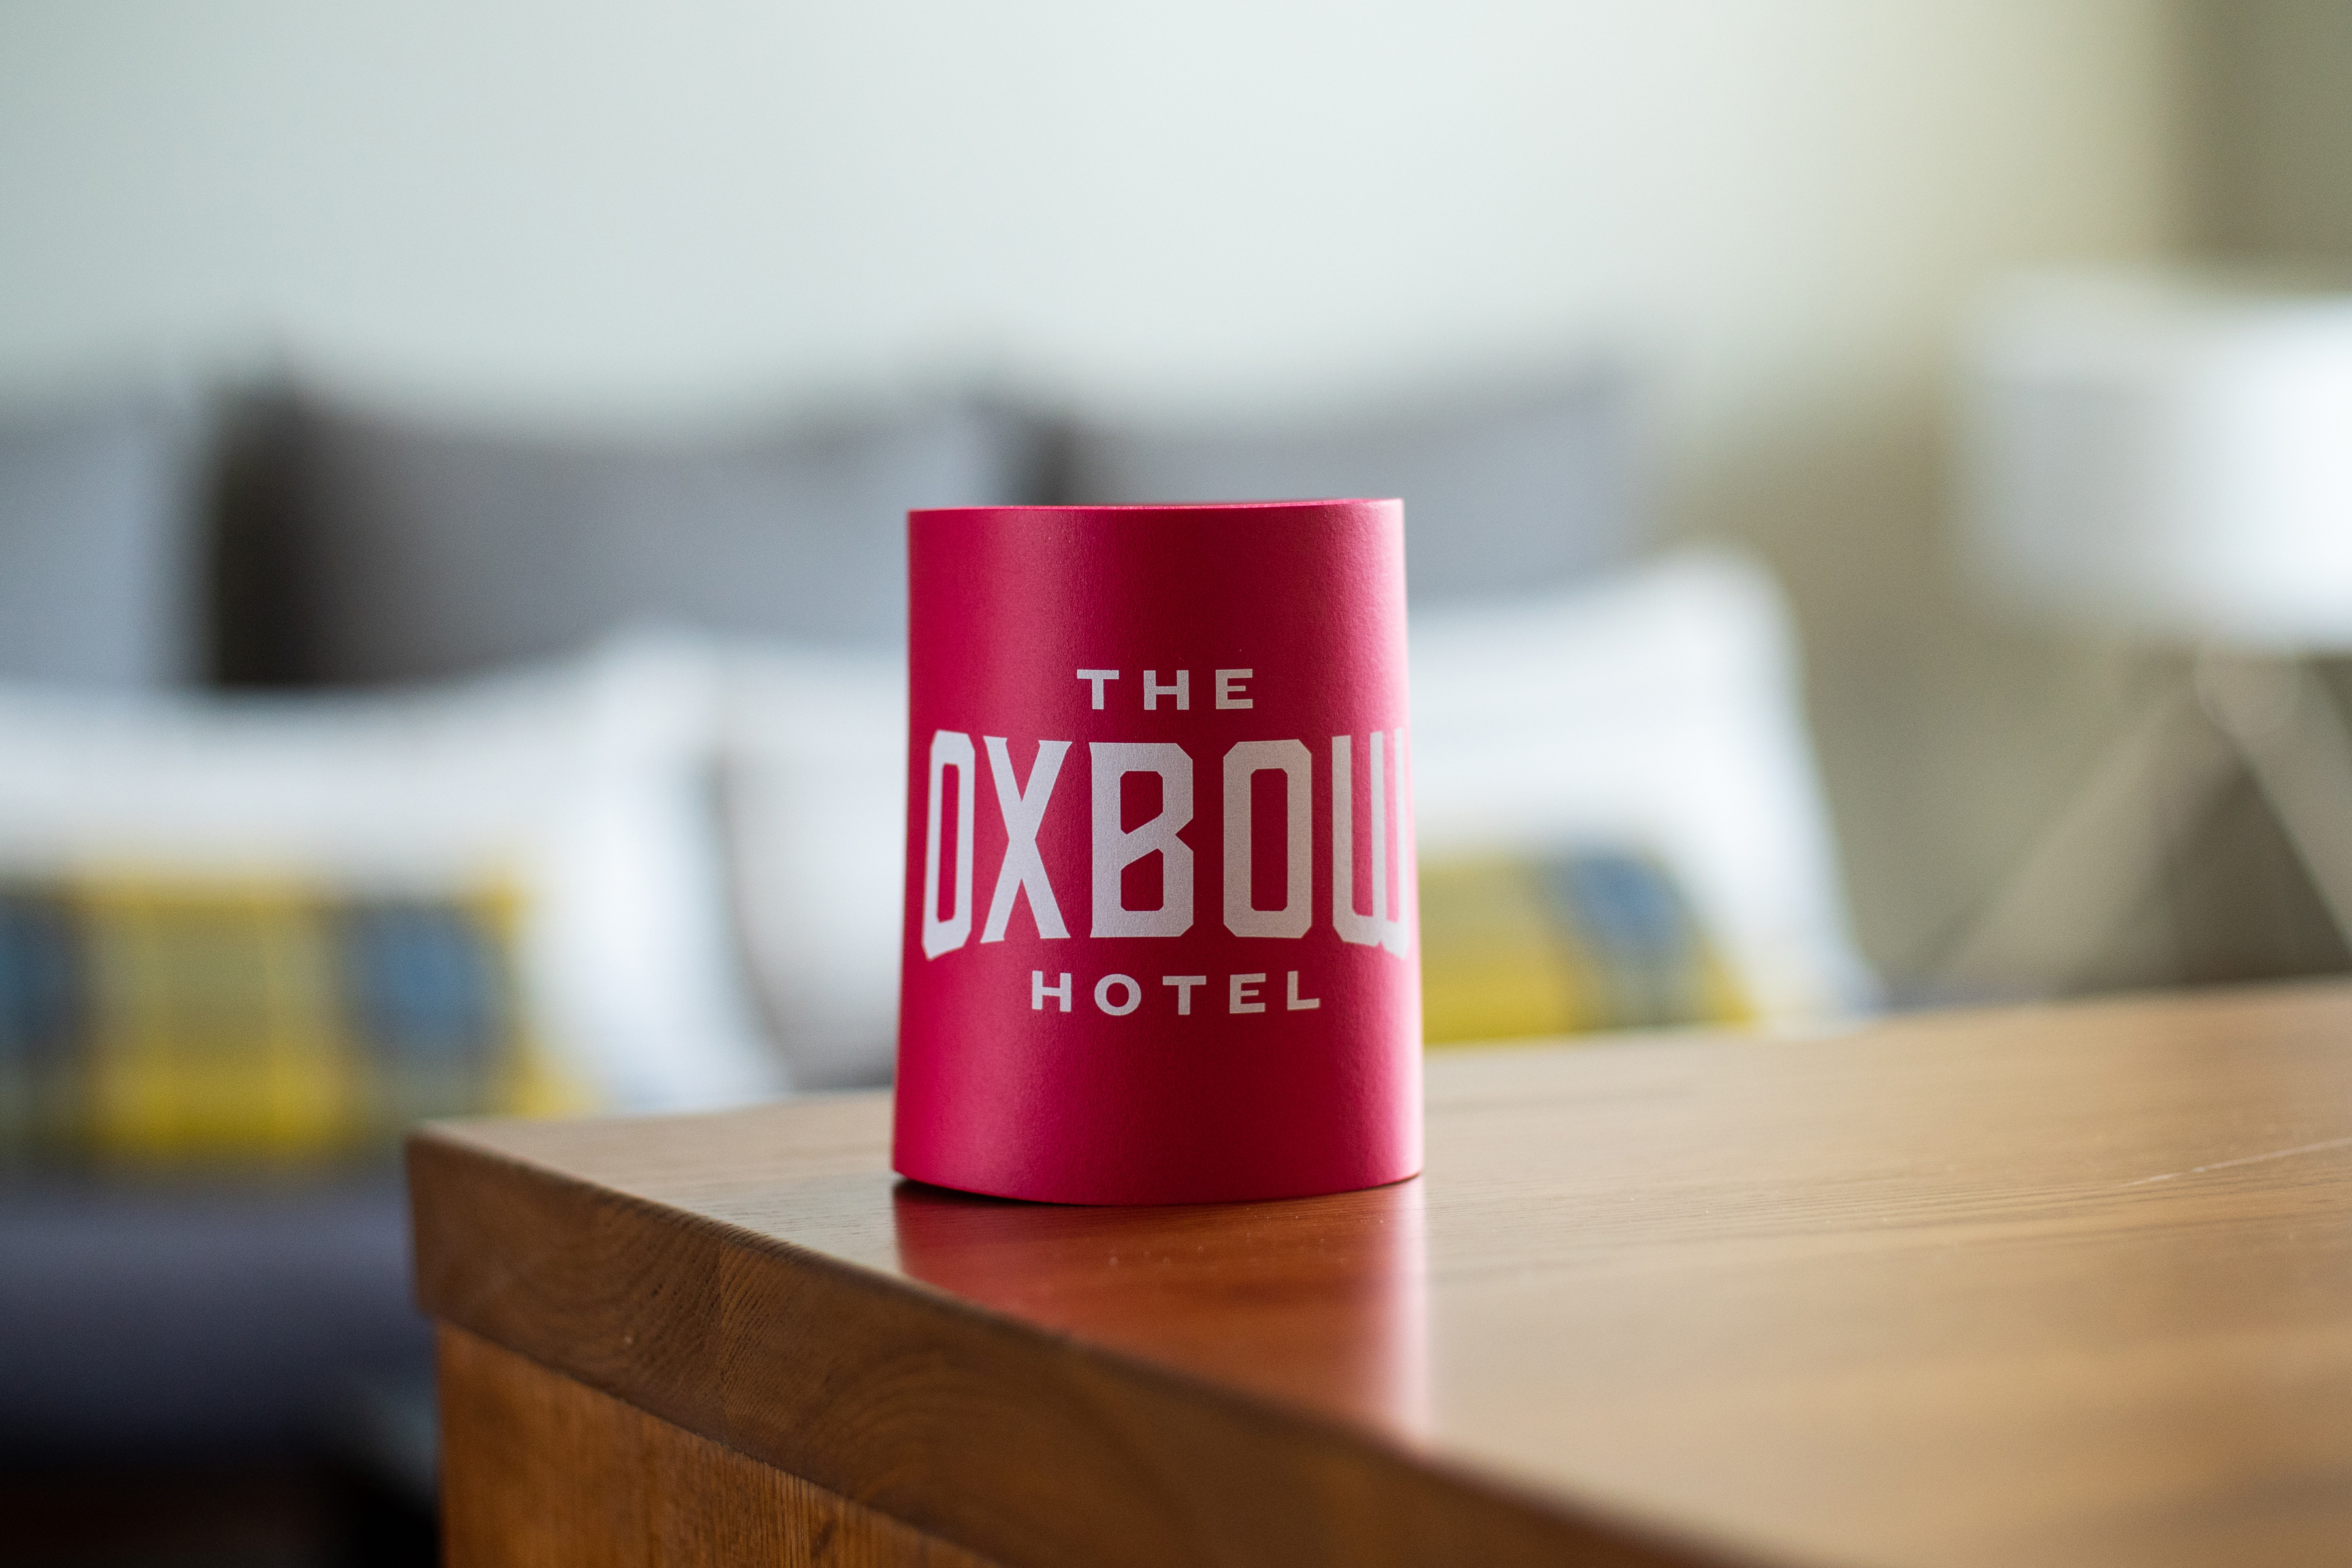 https://www.theoxbowhotel.com/wp-content/uploads/2018/08/can_koozie_red_1.jpg